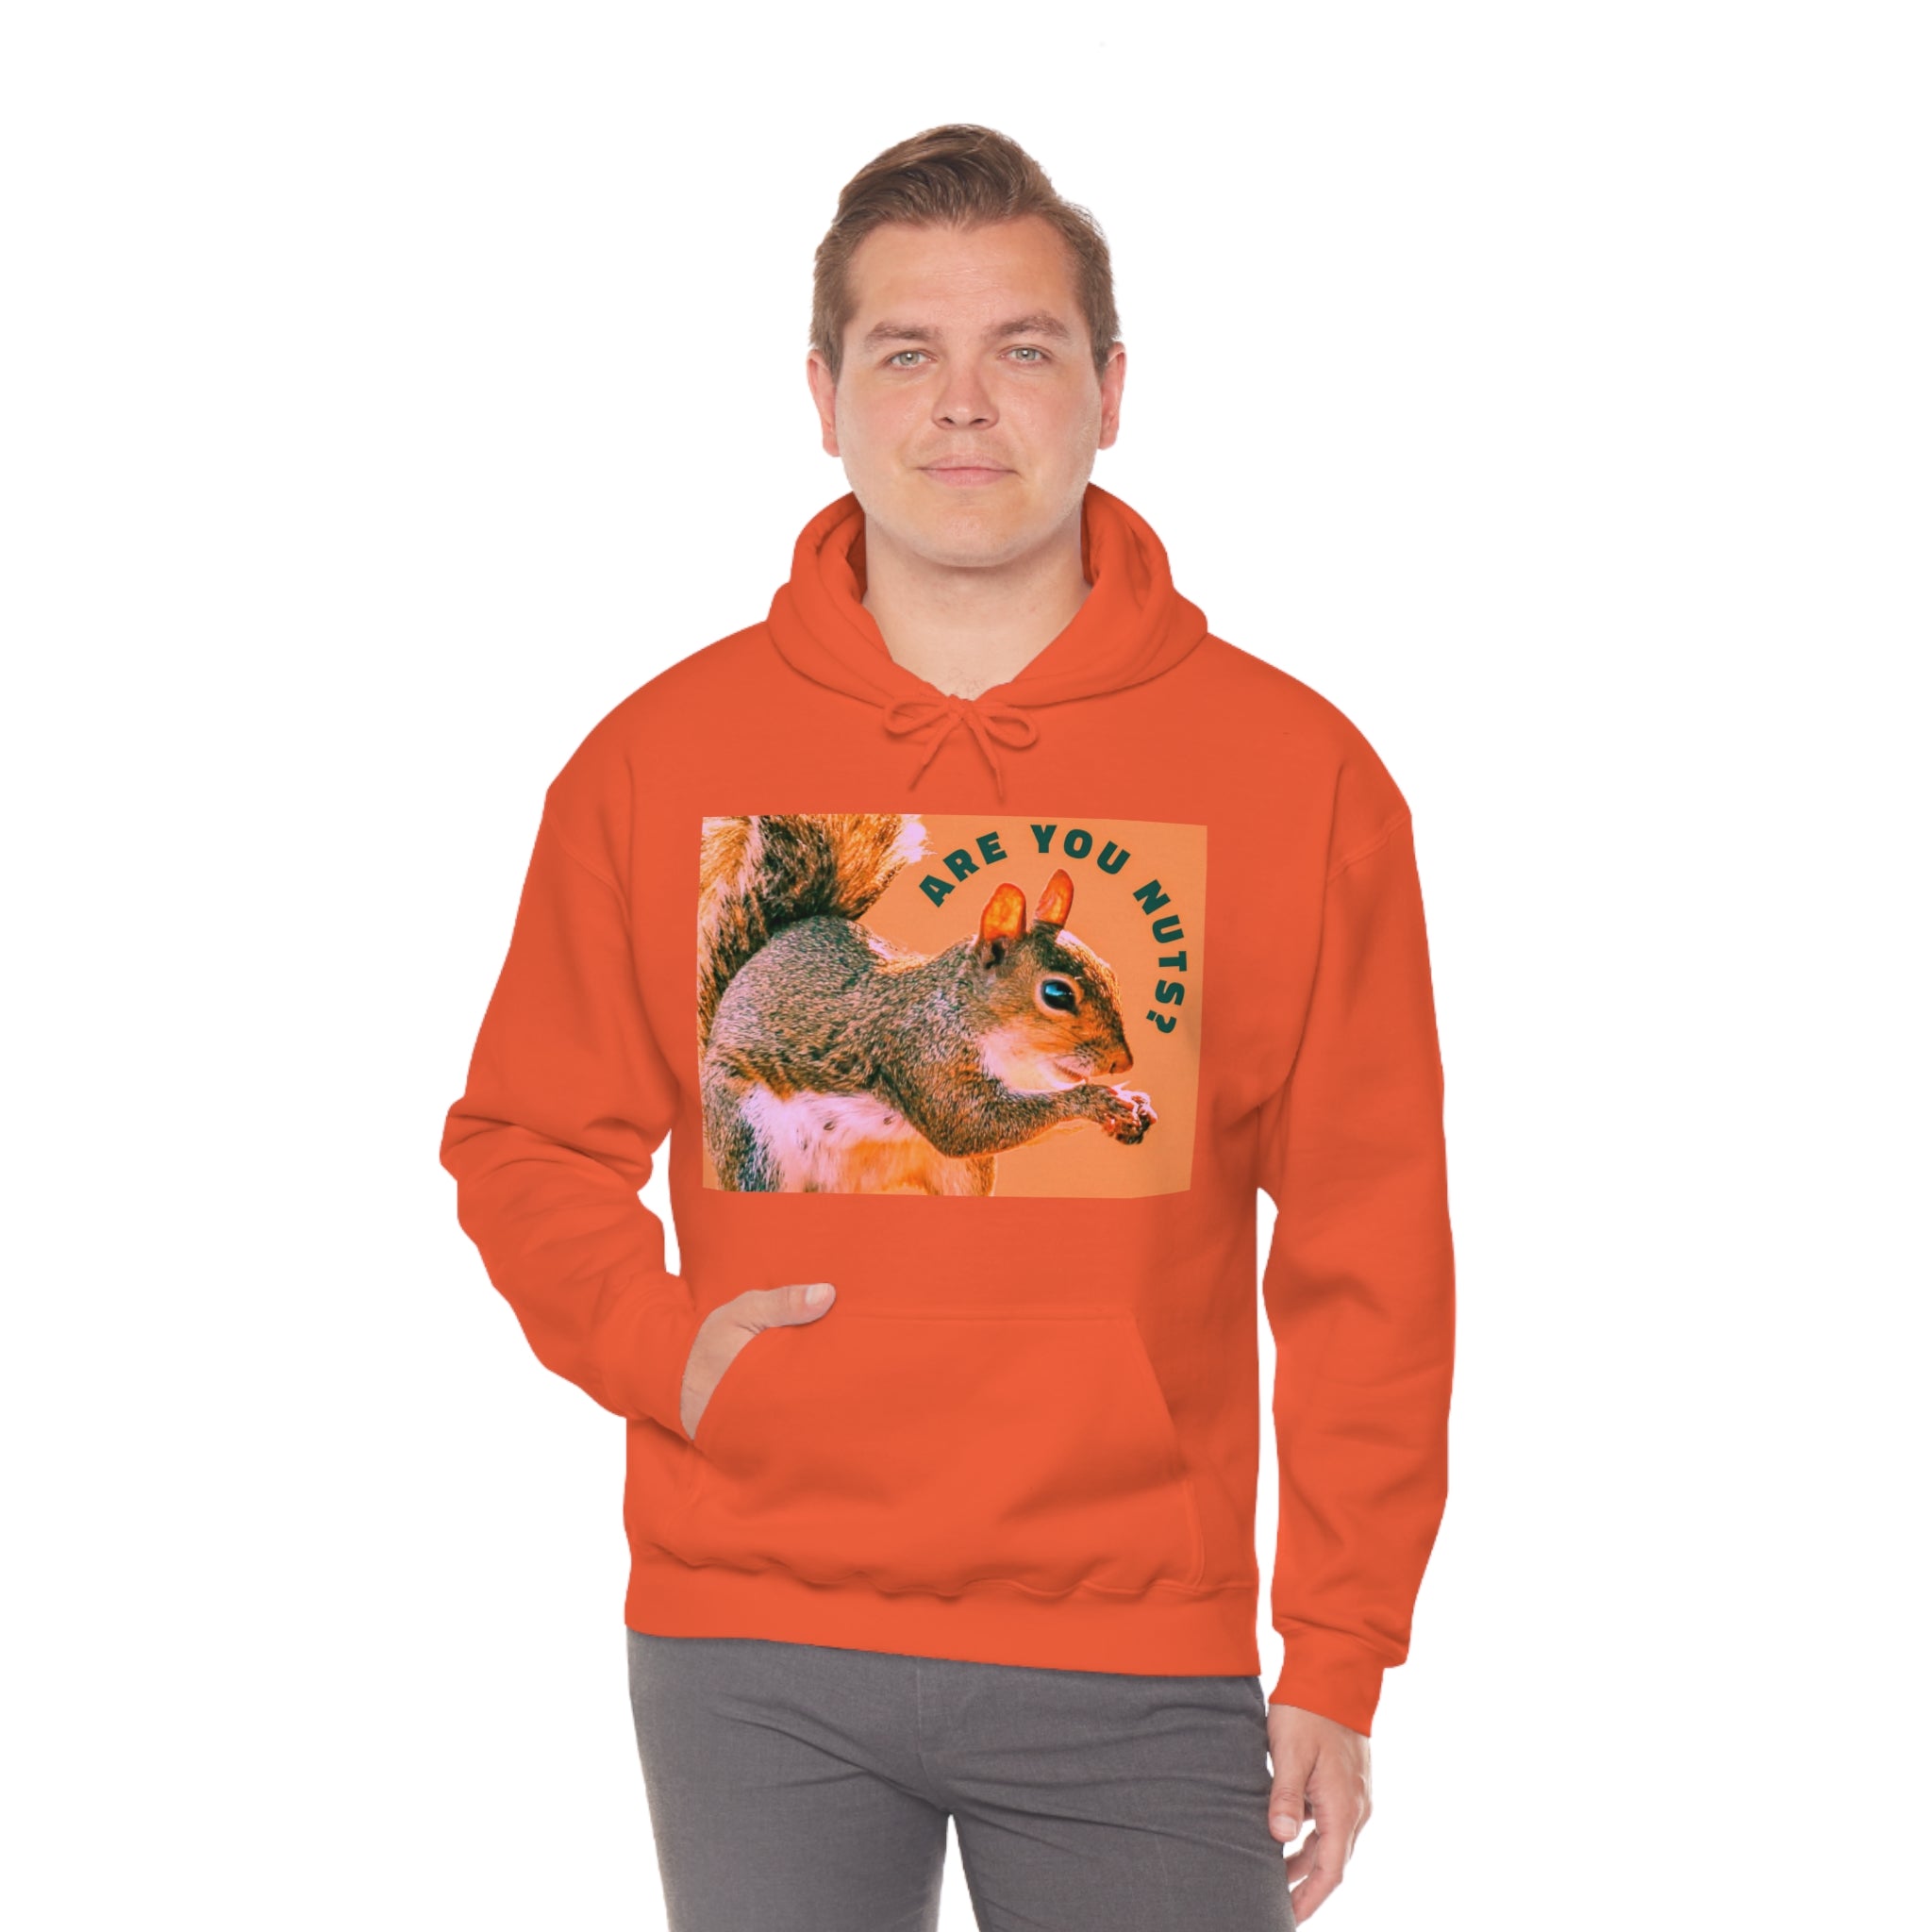 Are you Nuts? Funny Squirrel Unisex Hooded Sweatshirt up to 5XL - Shell Design Boutique